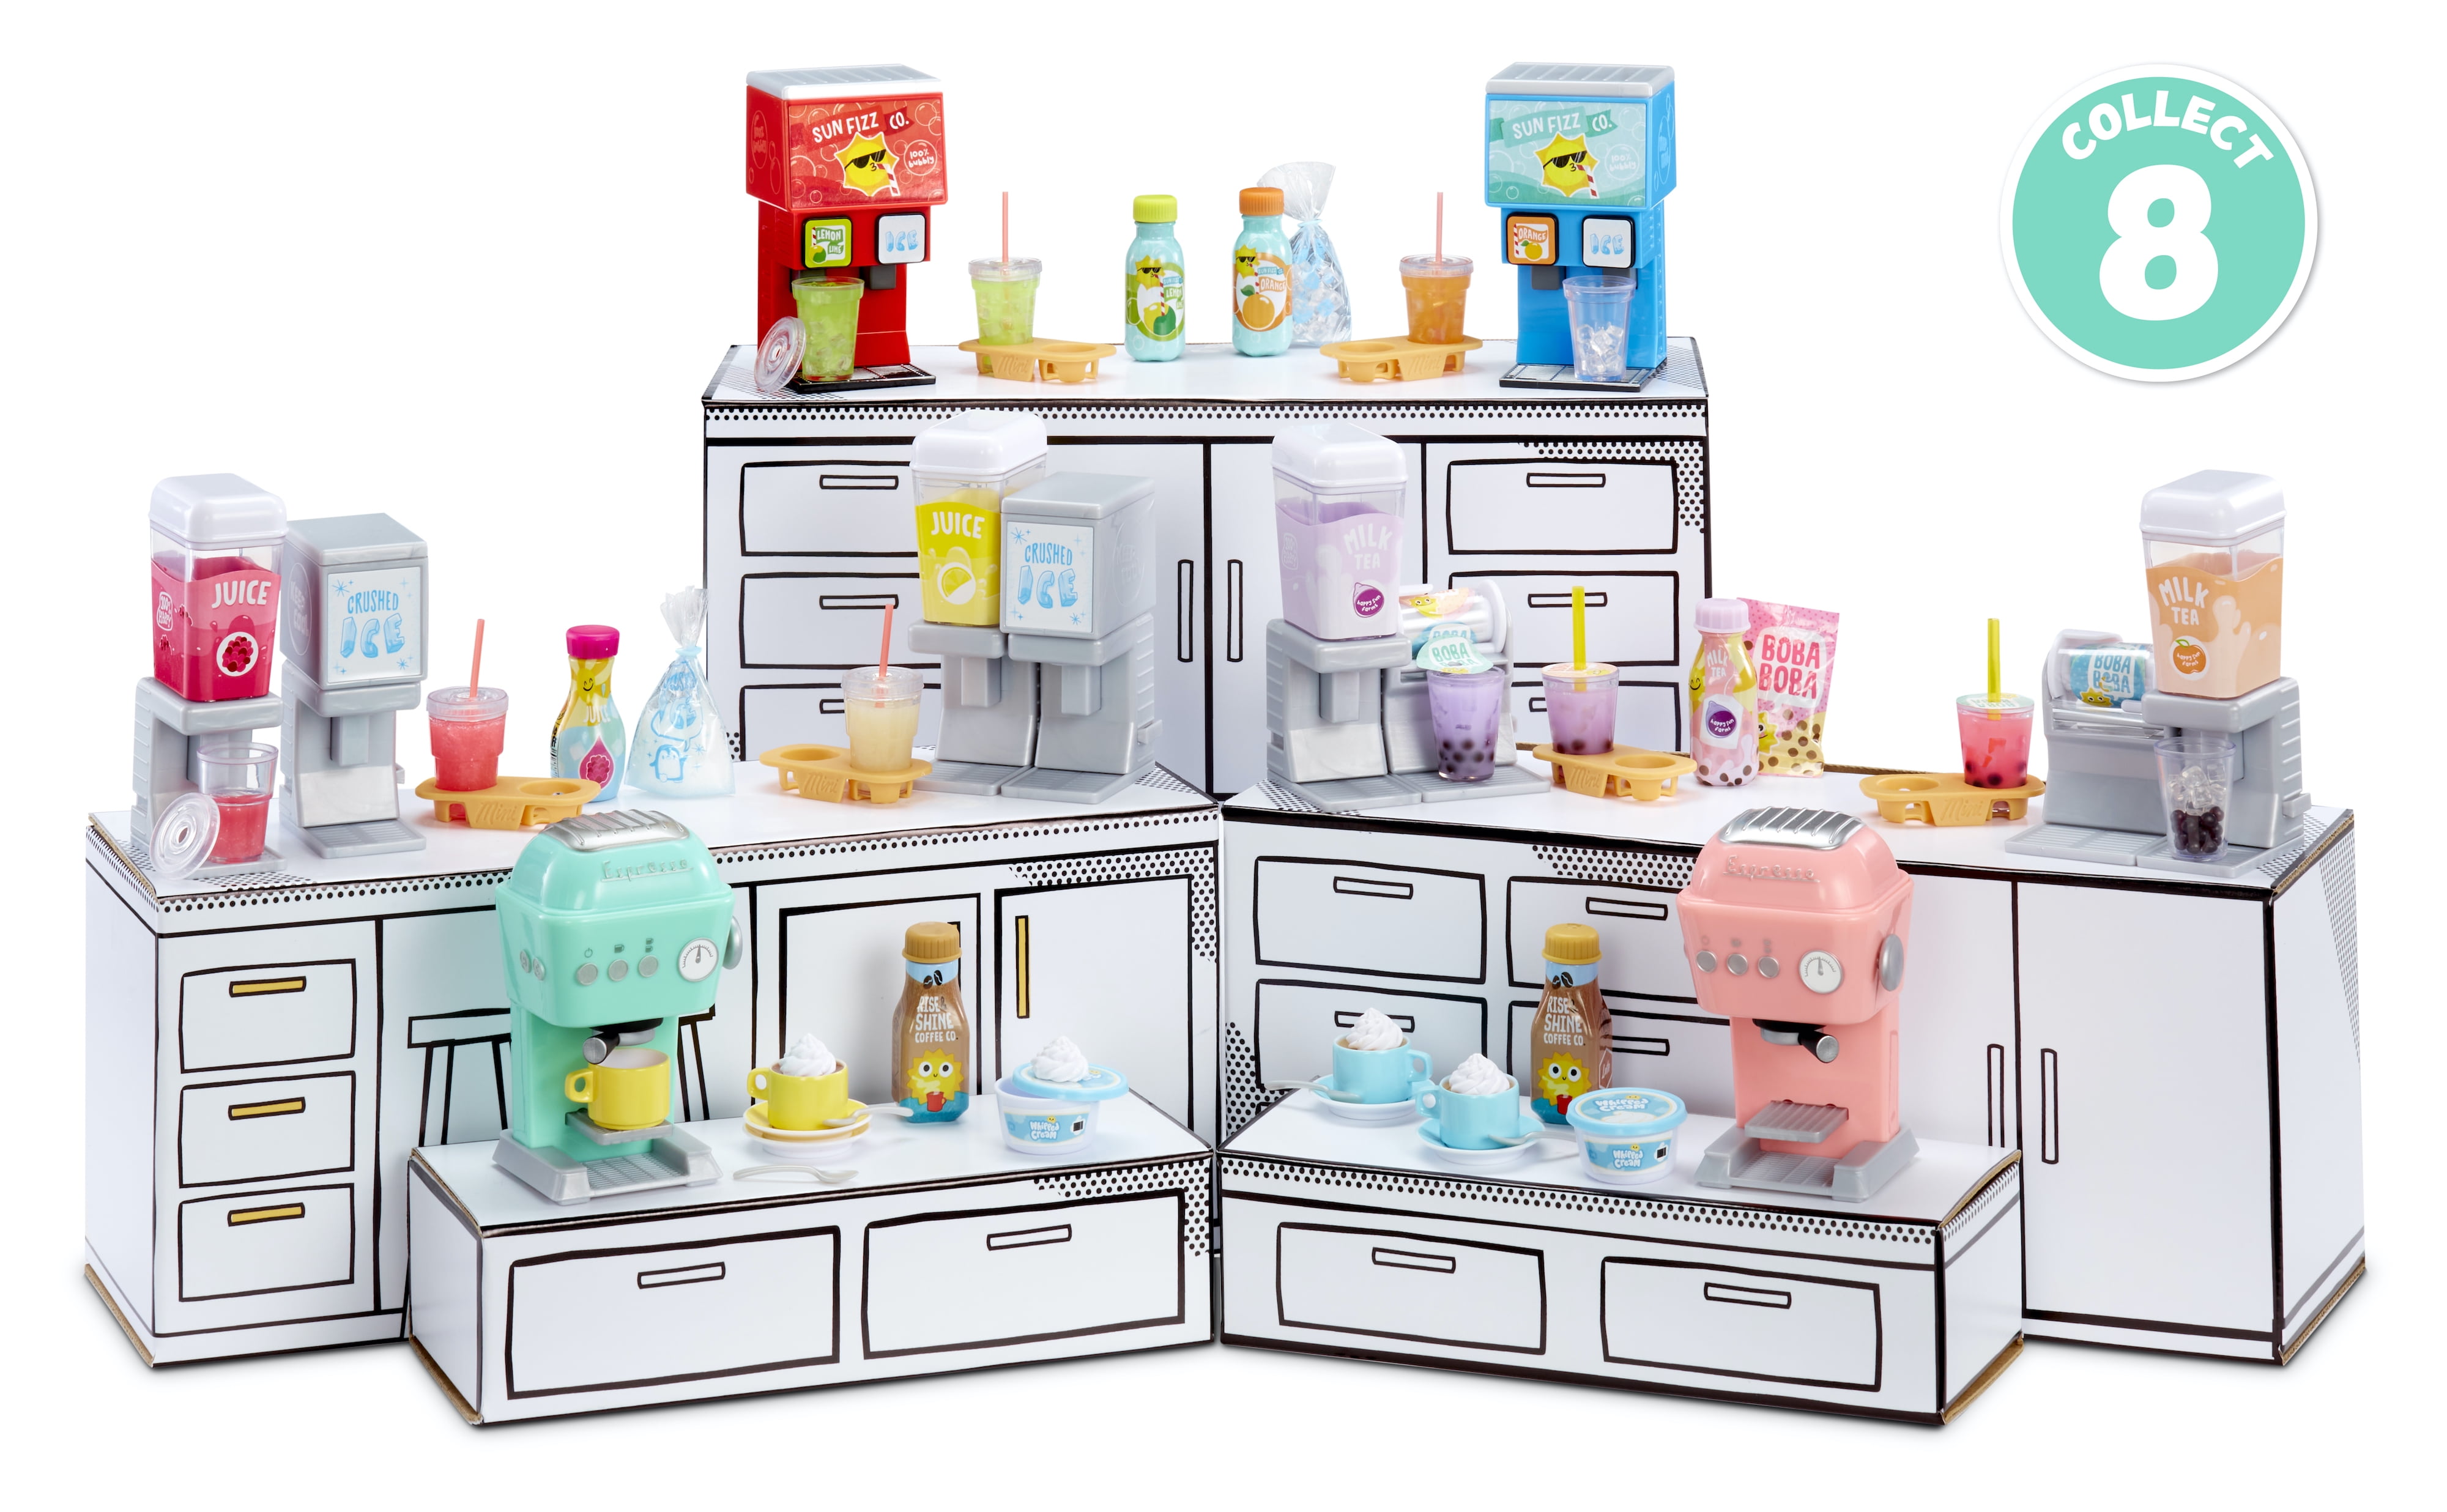 Miniverse Make It Mini Appliances Collection (Styles Vary)